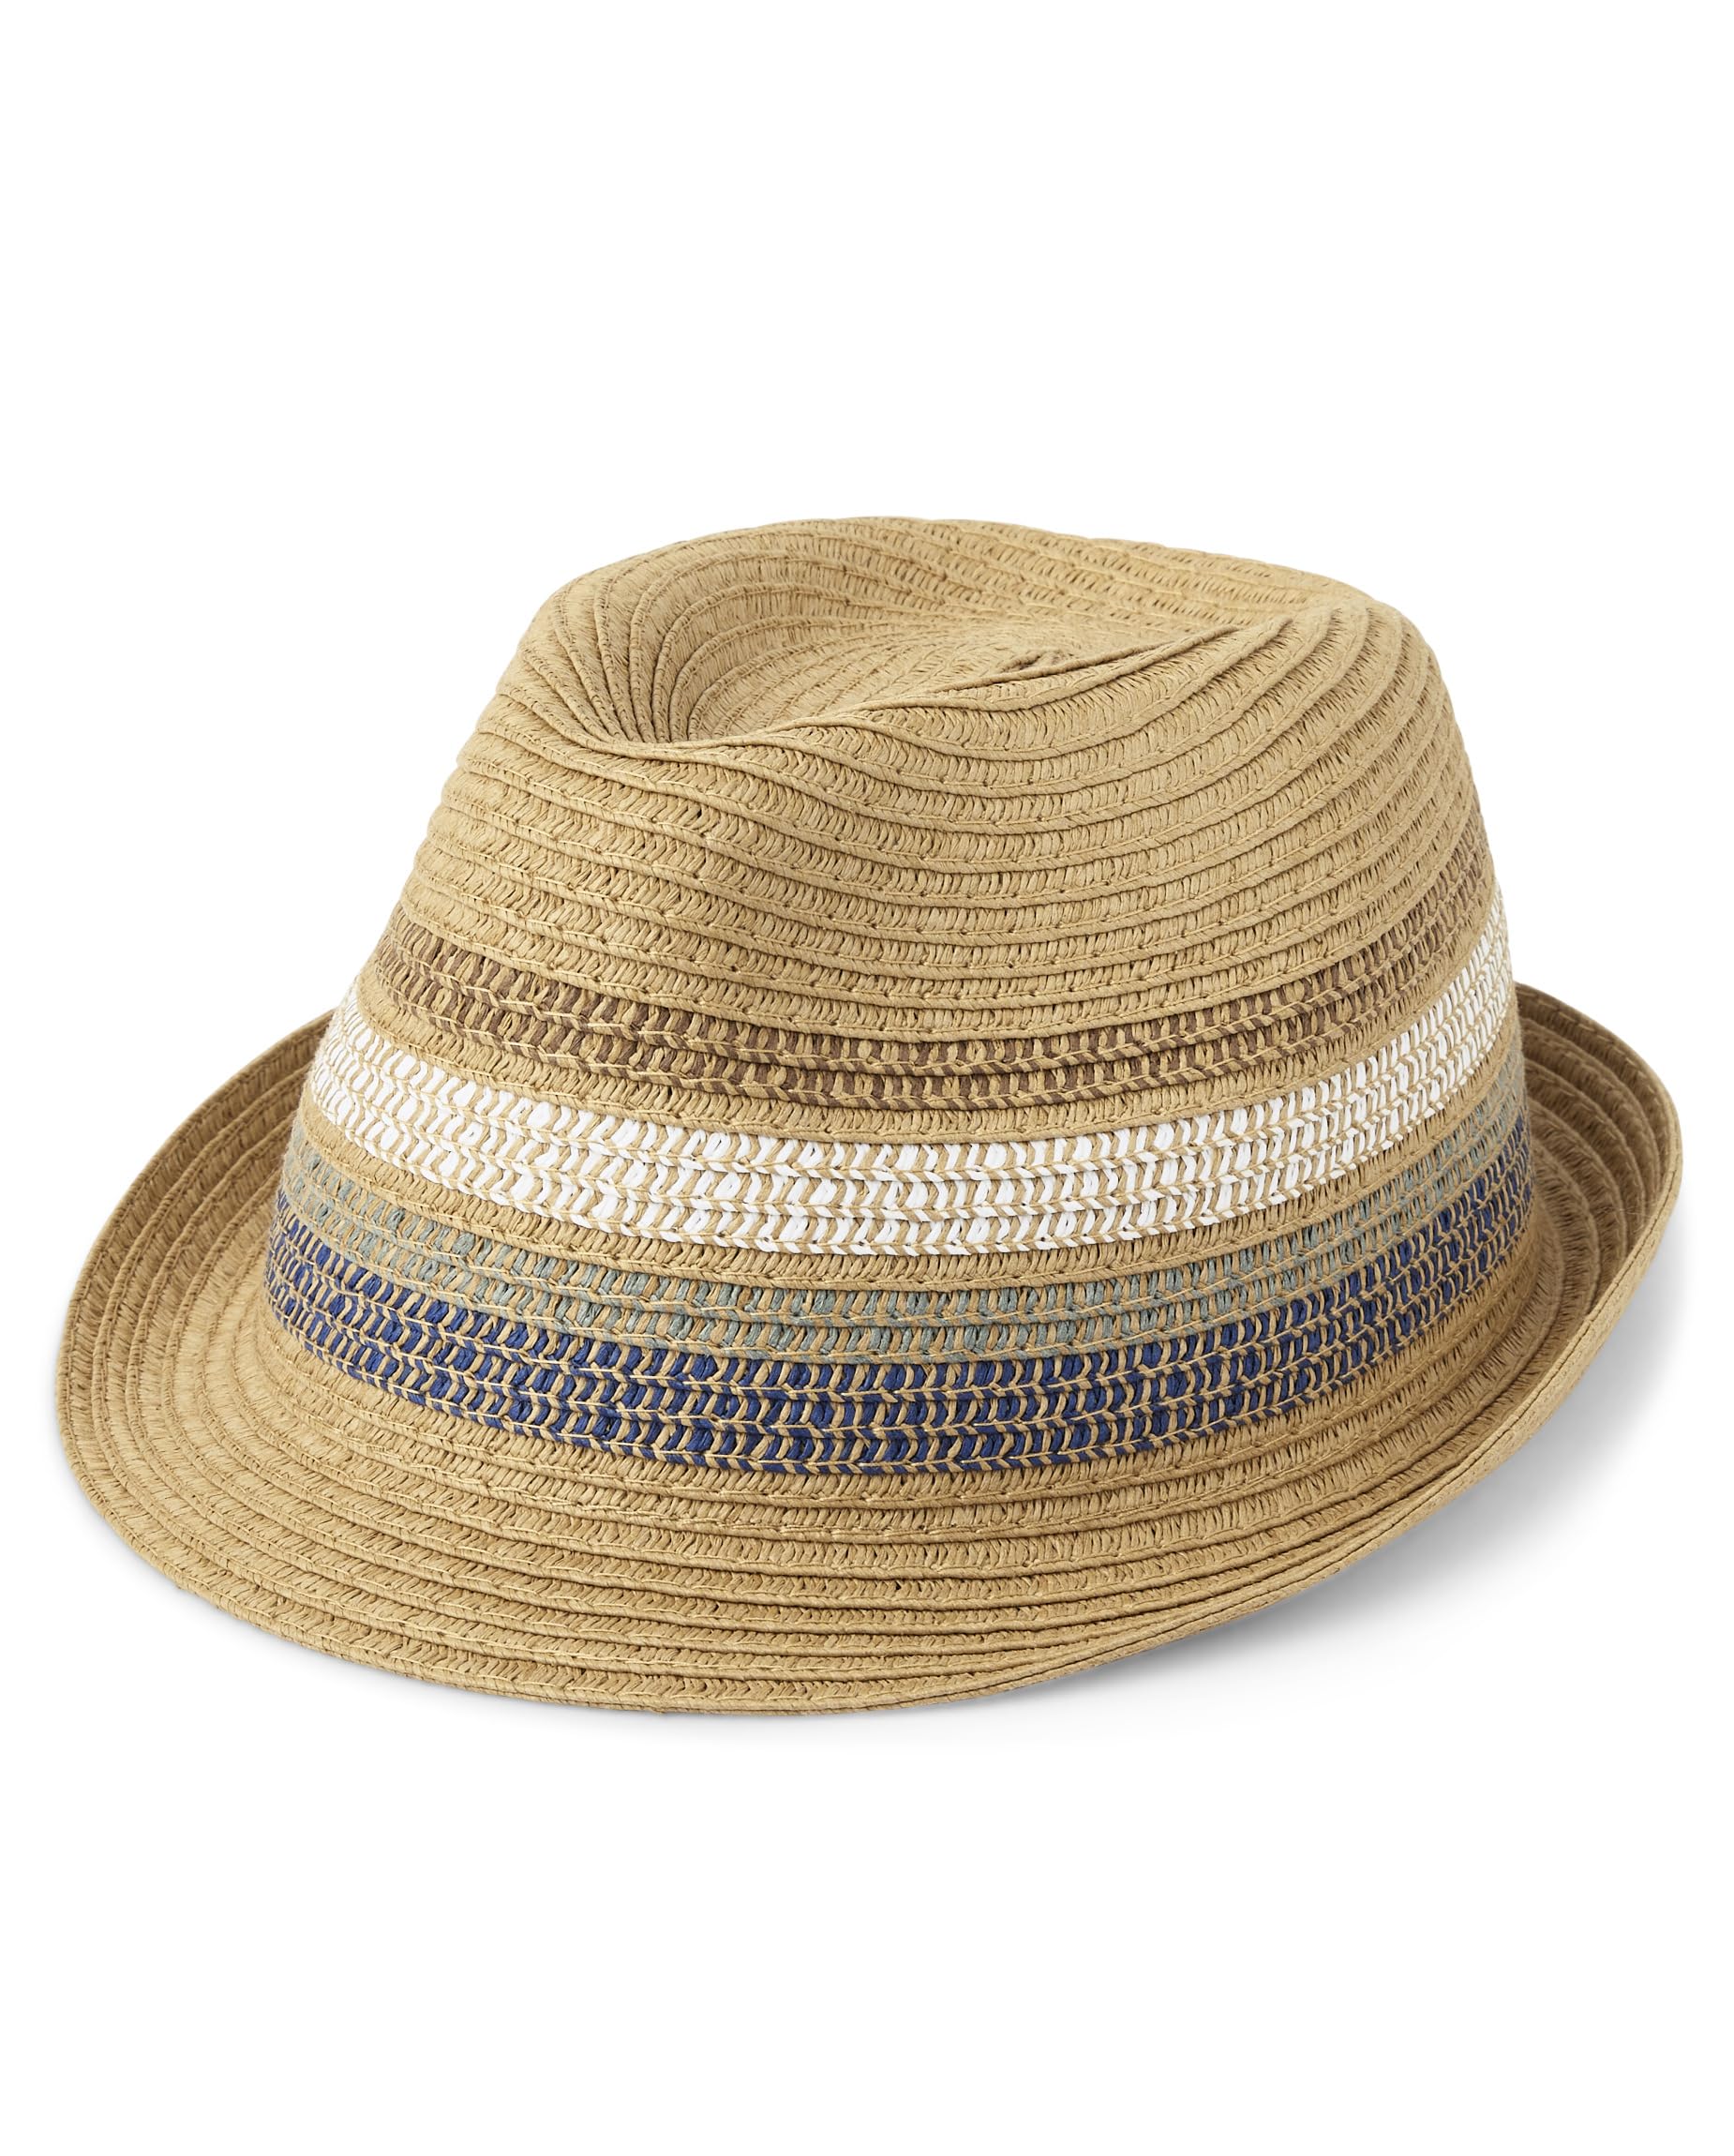 The Children's Place Boys' Natural Fedora Hat